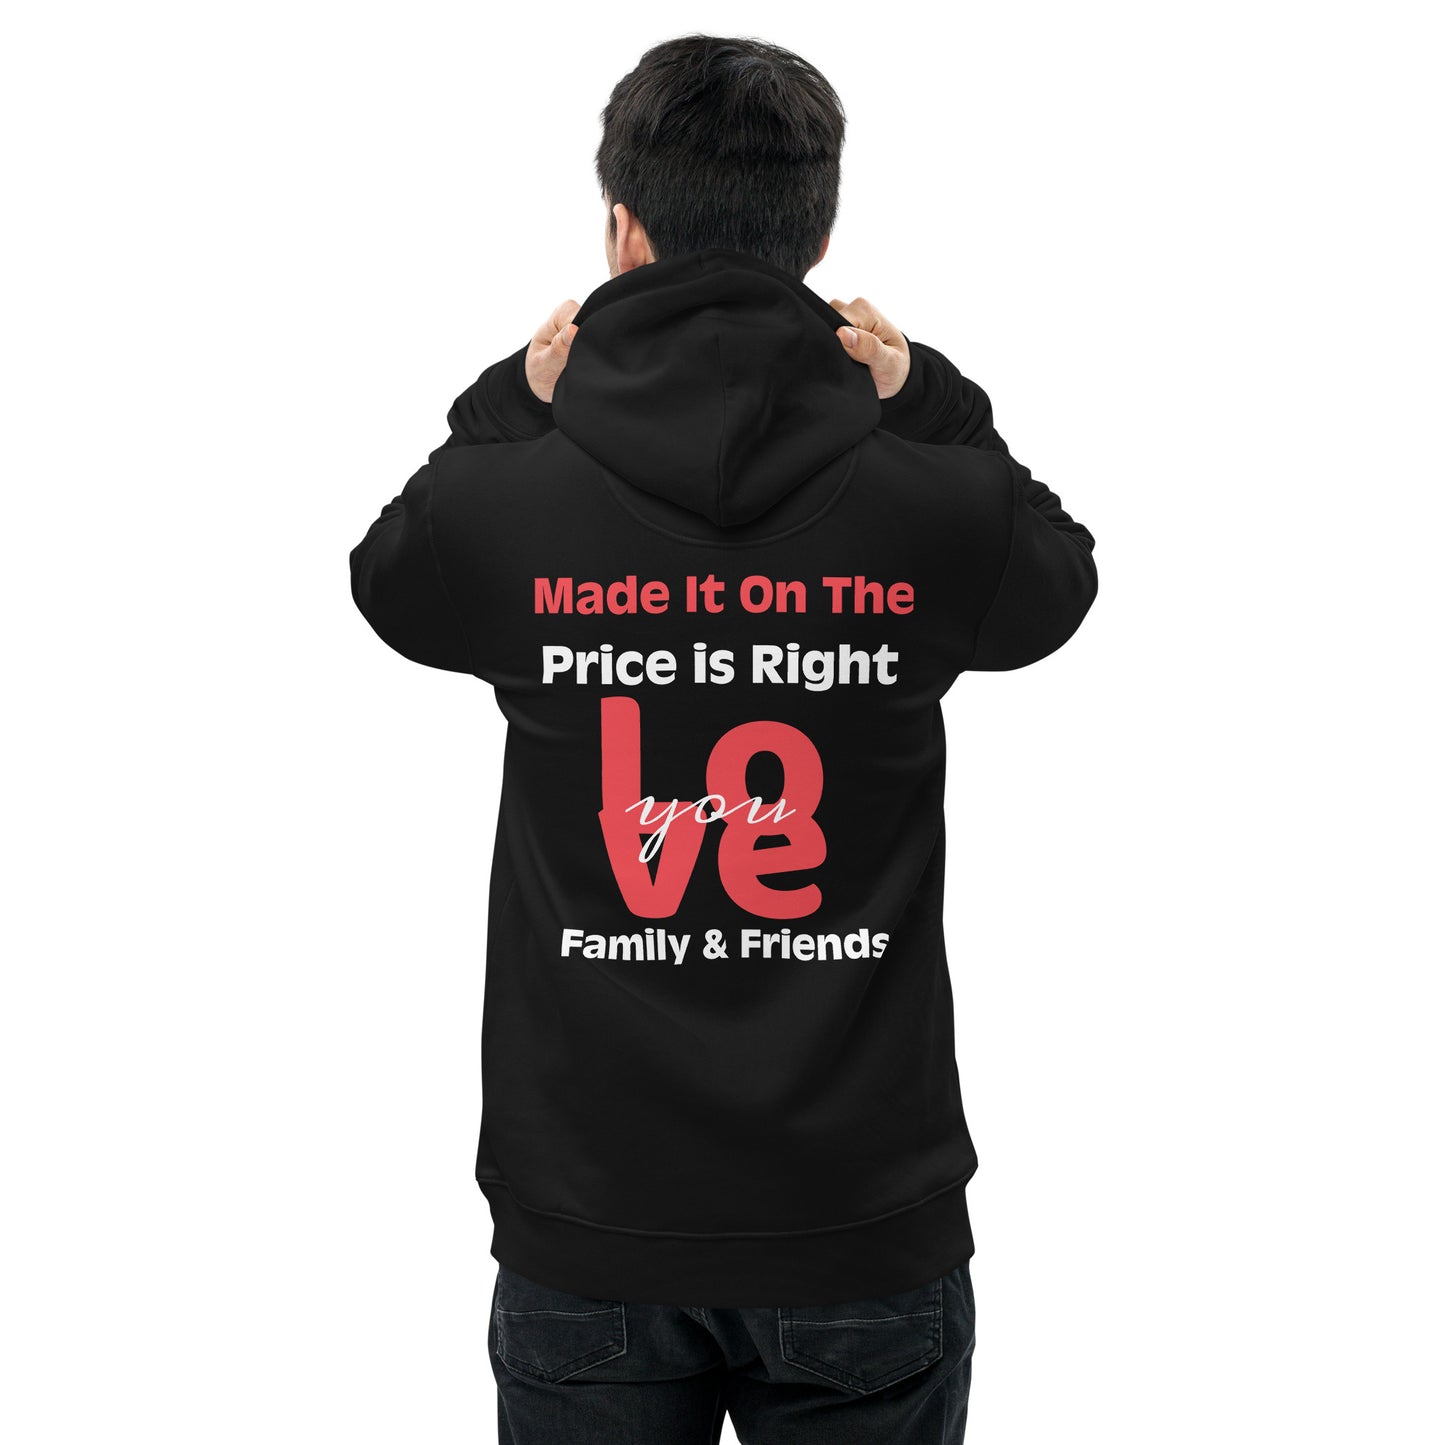 Unisex essential eco hoodie - The Price Is Right - Spin The Wheel on Front - Greeting to Family & Friends on Back